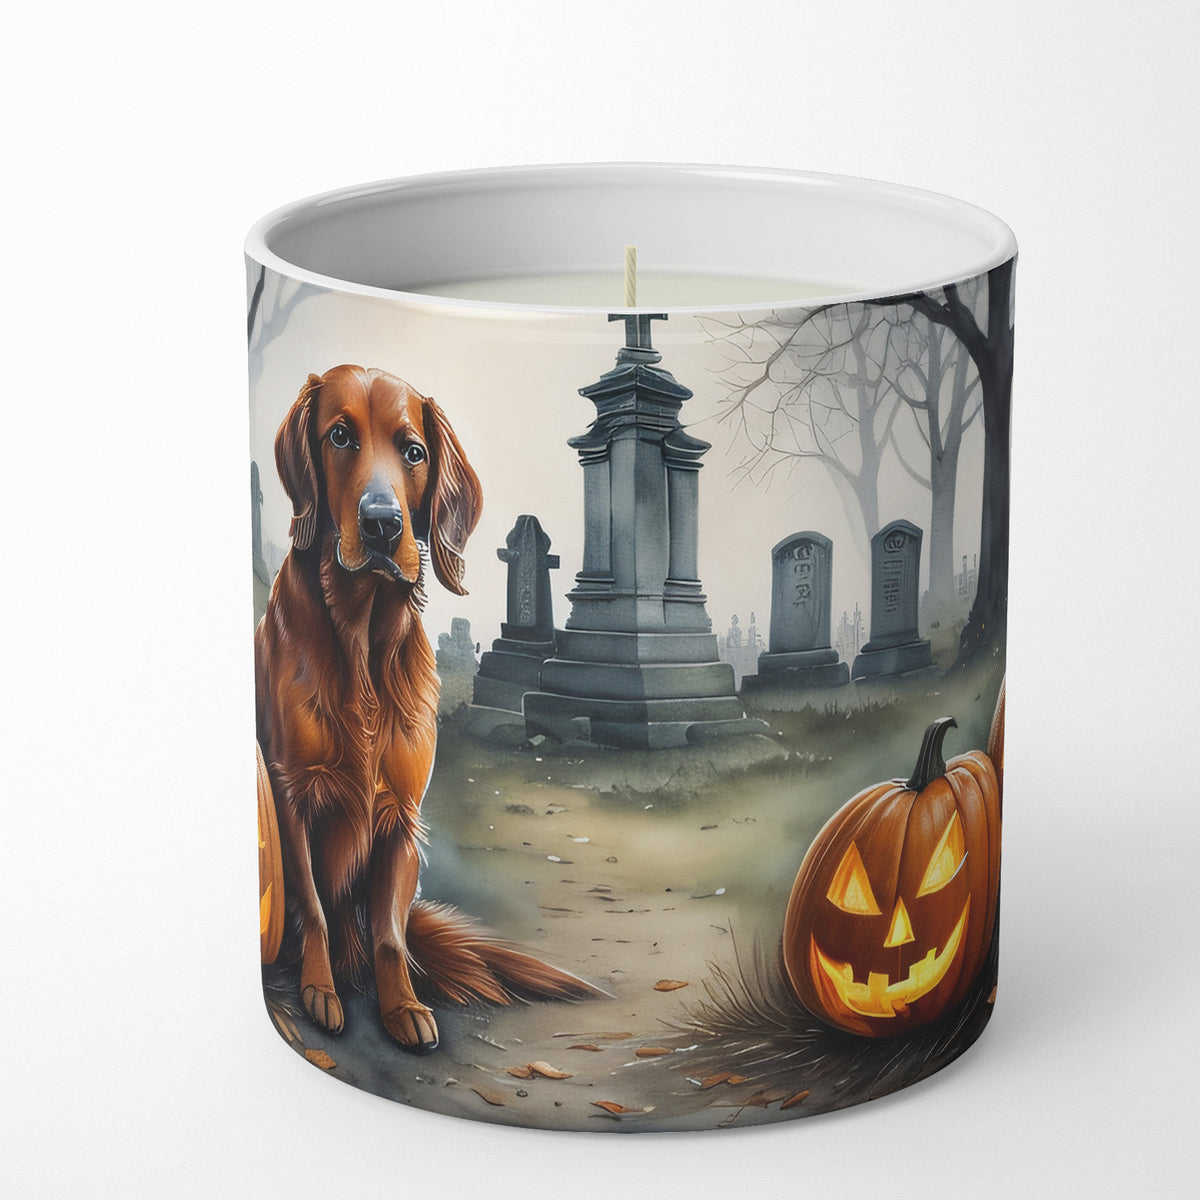 Buy this Irish Setter Spooky Halloween Decorative Soy Candle